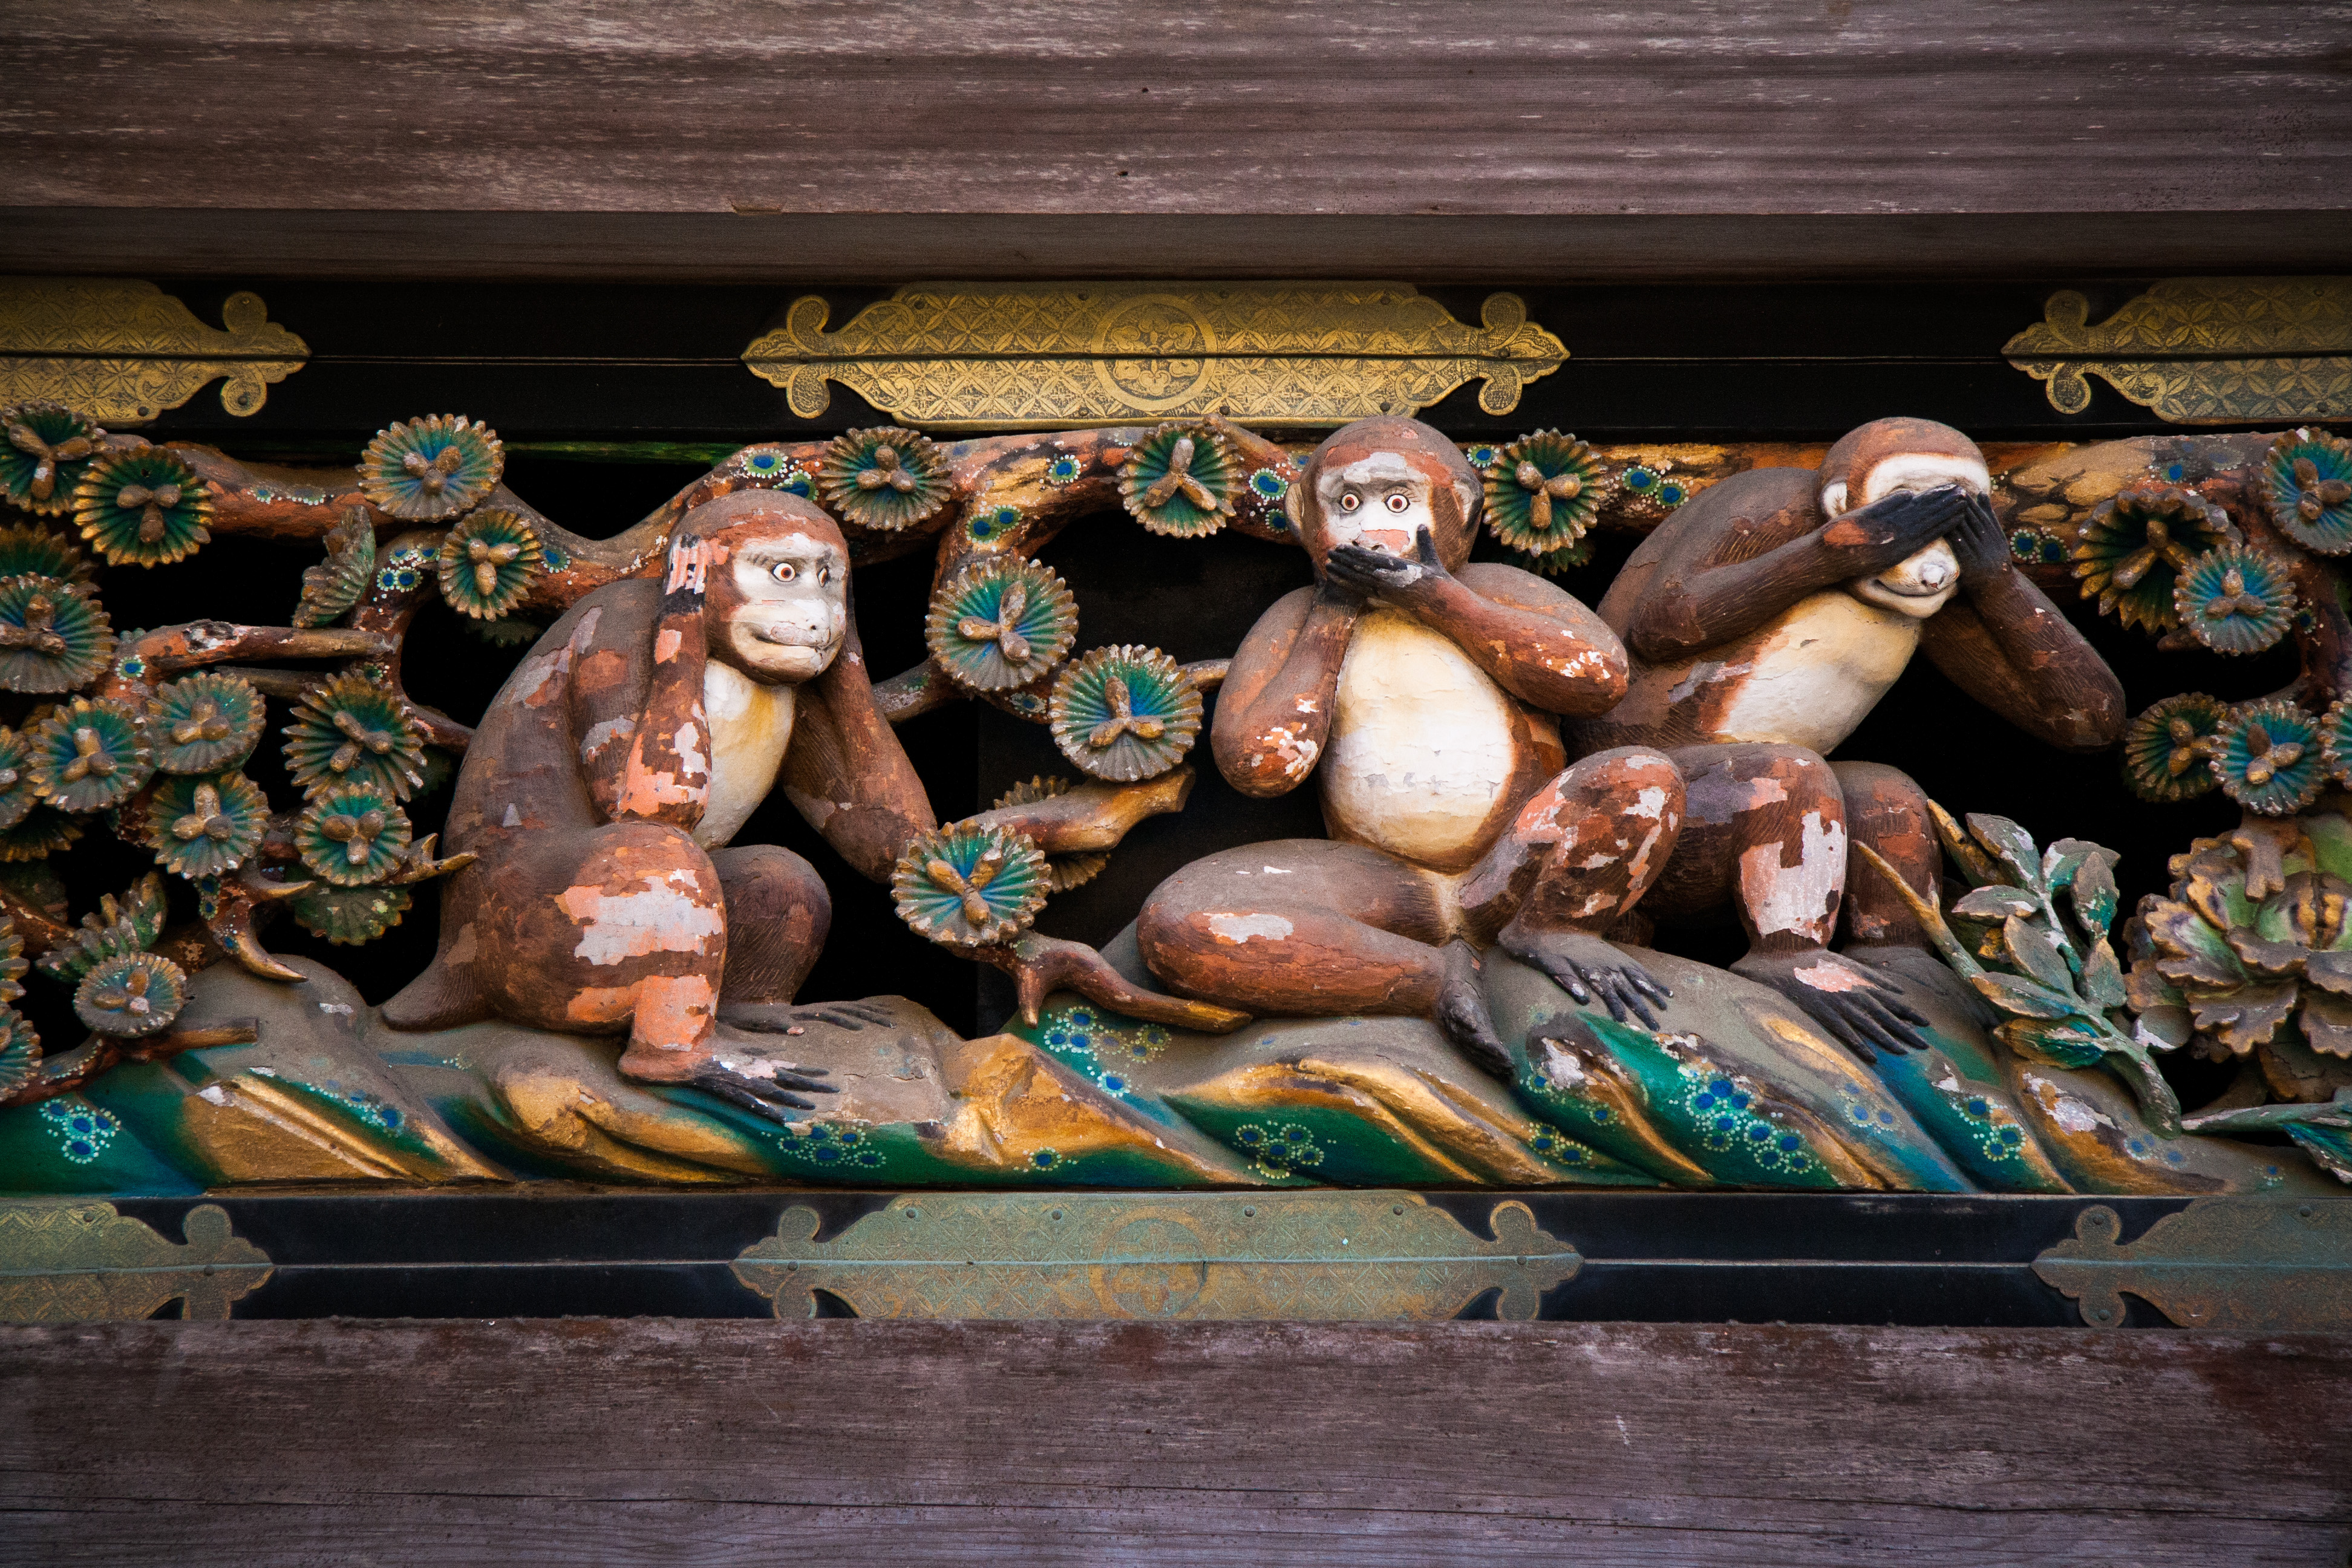 Three Wise Monkeys carving on the Sacred Stable.